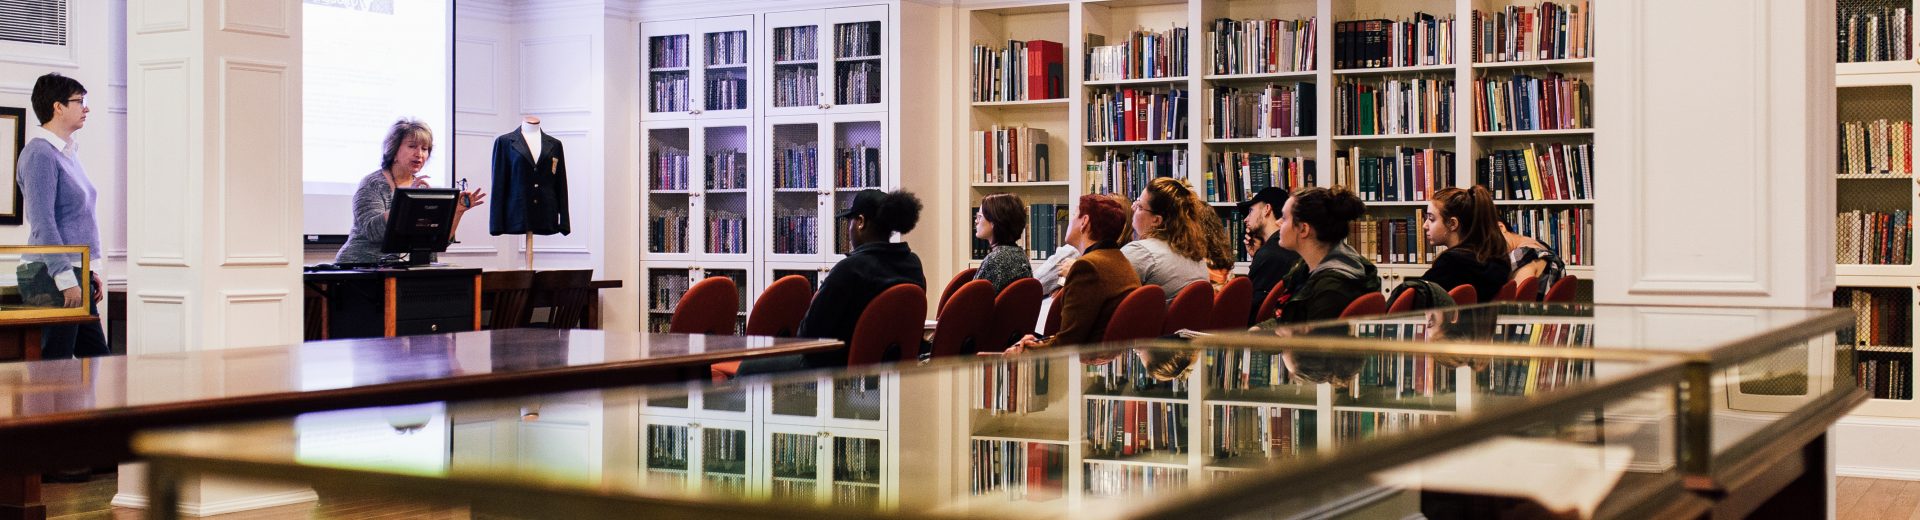 Image of UNCG University Archives, Hodges Reading Room, Class in Session